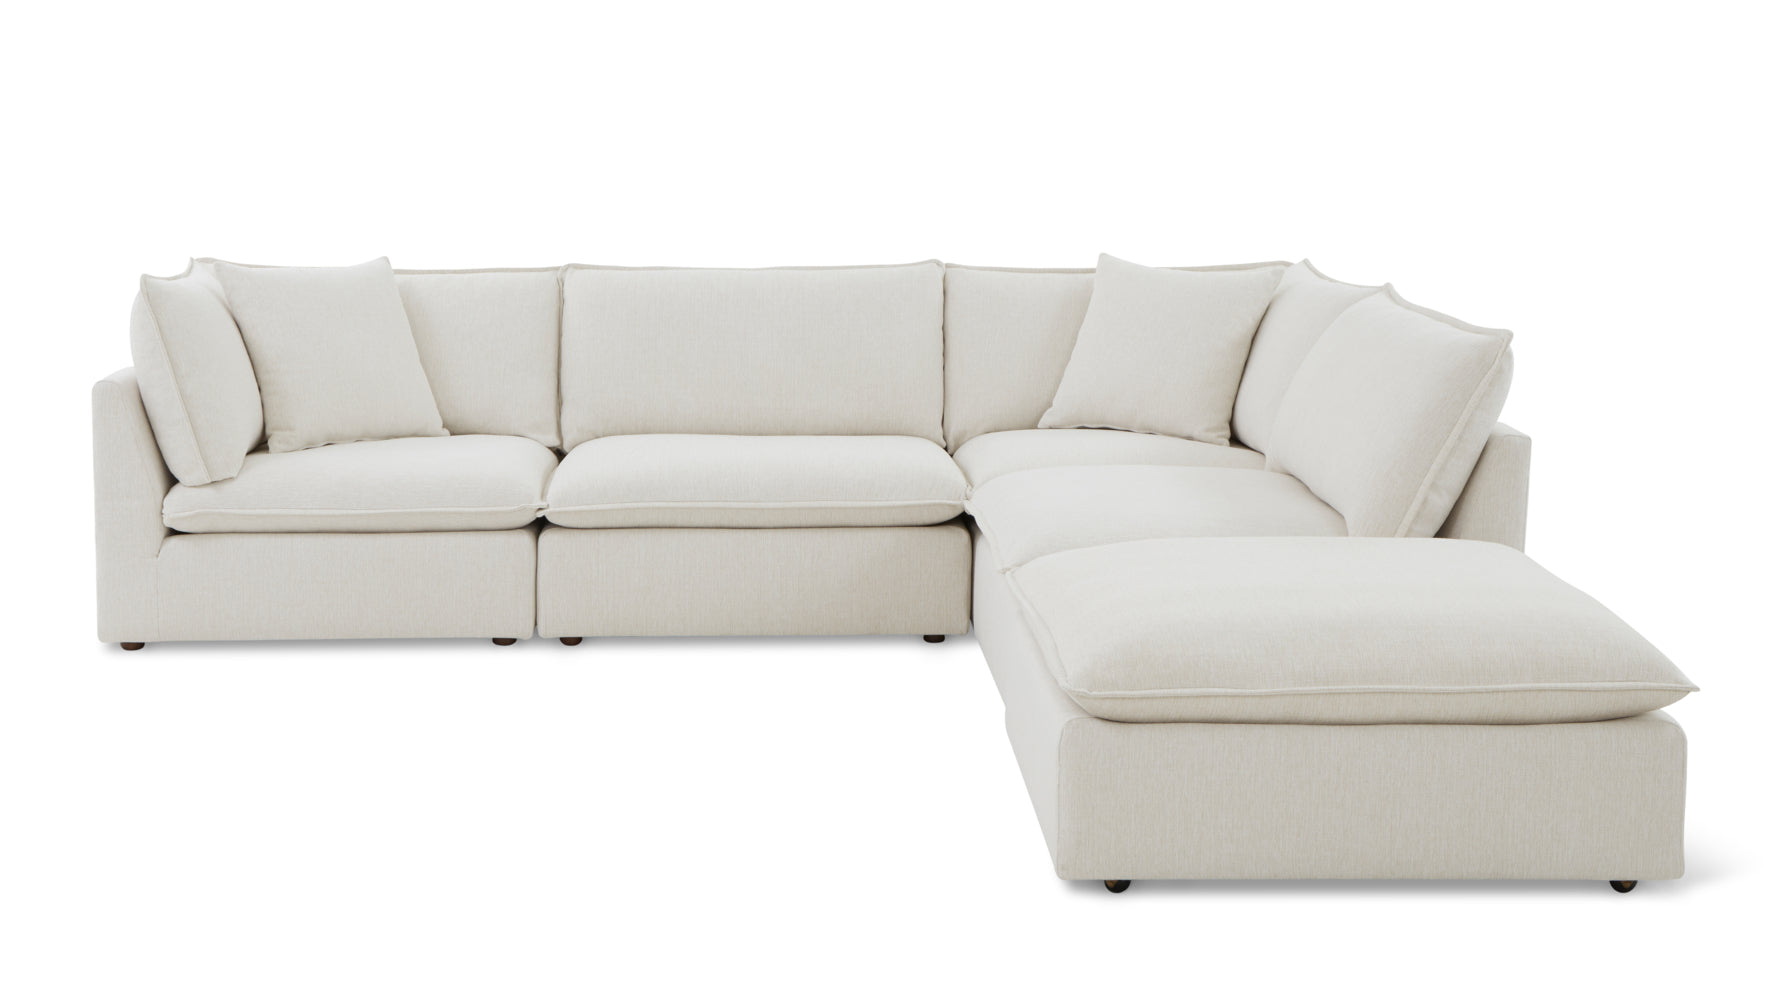 Chill Time 5-Piece Modular Sectional, Birch - Image 1